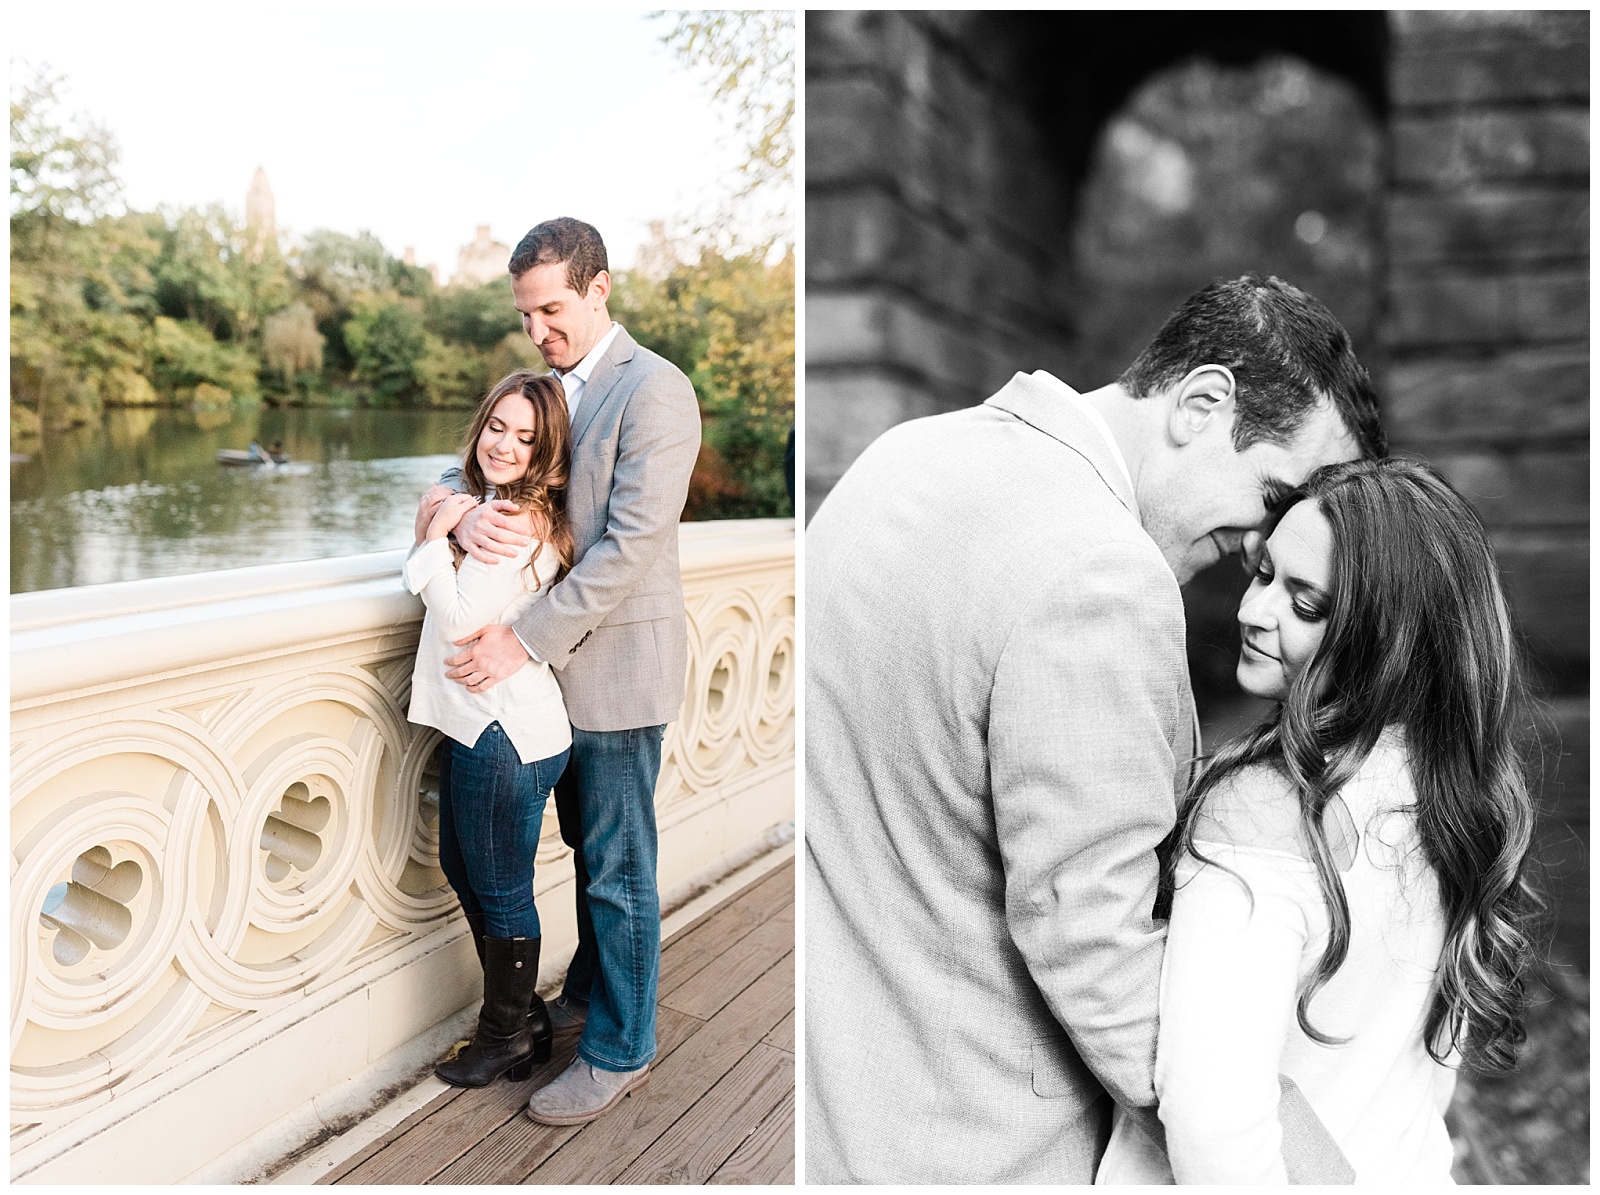 Bow Bridge,Central Park,City,Engagement Session,Fall,NYC,Nature,New York,Wedding Photographer,